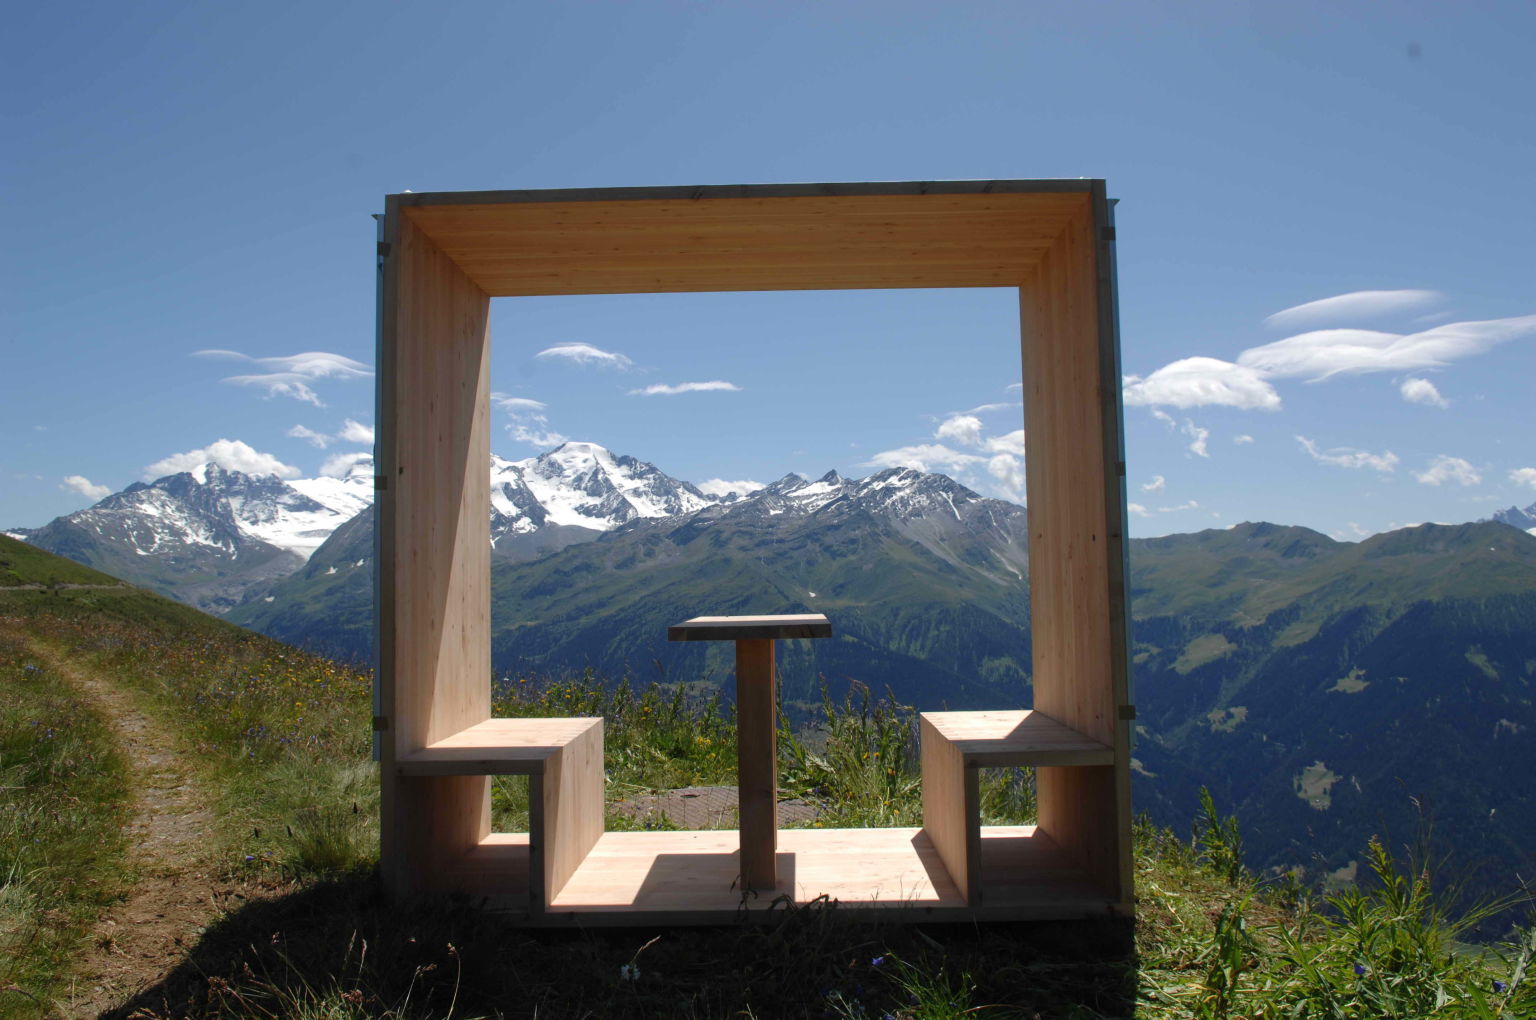 In summer, the pastures of Verbier are transformed into a veritable open-air museum, Valais, Switzerland